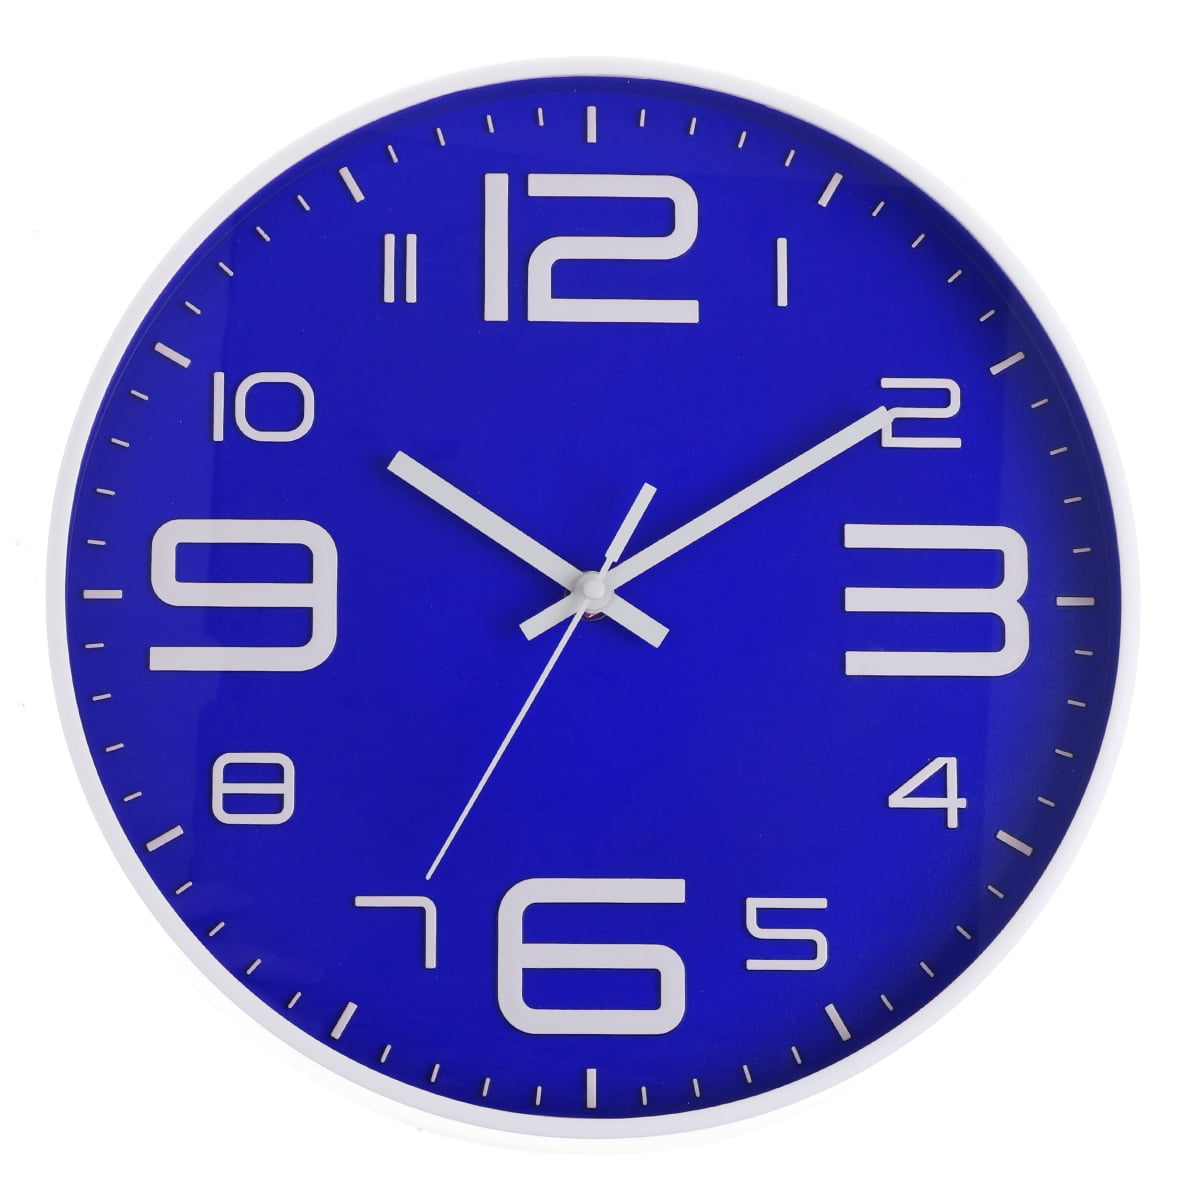 Wall Clock 12 Silent Non-Ticking Modern Style Wooden Wall Clocks Decorative for Office Home Bedroom School Black 